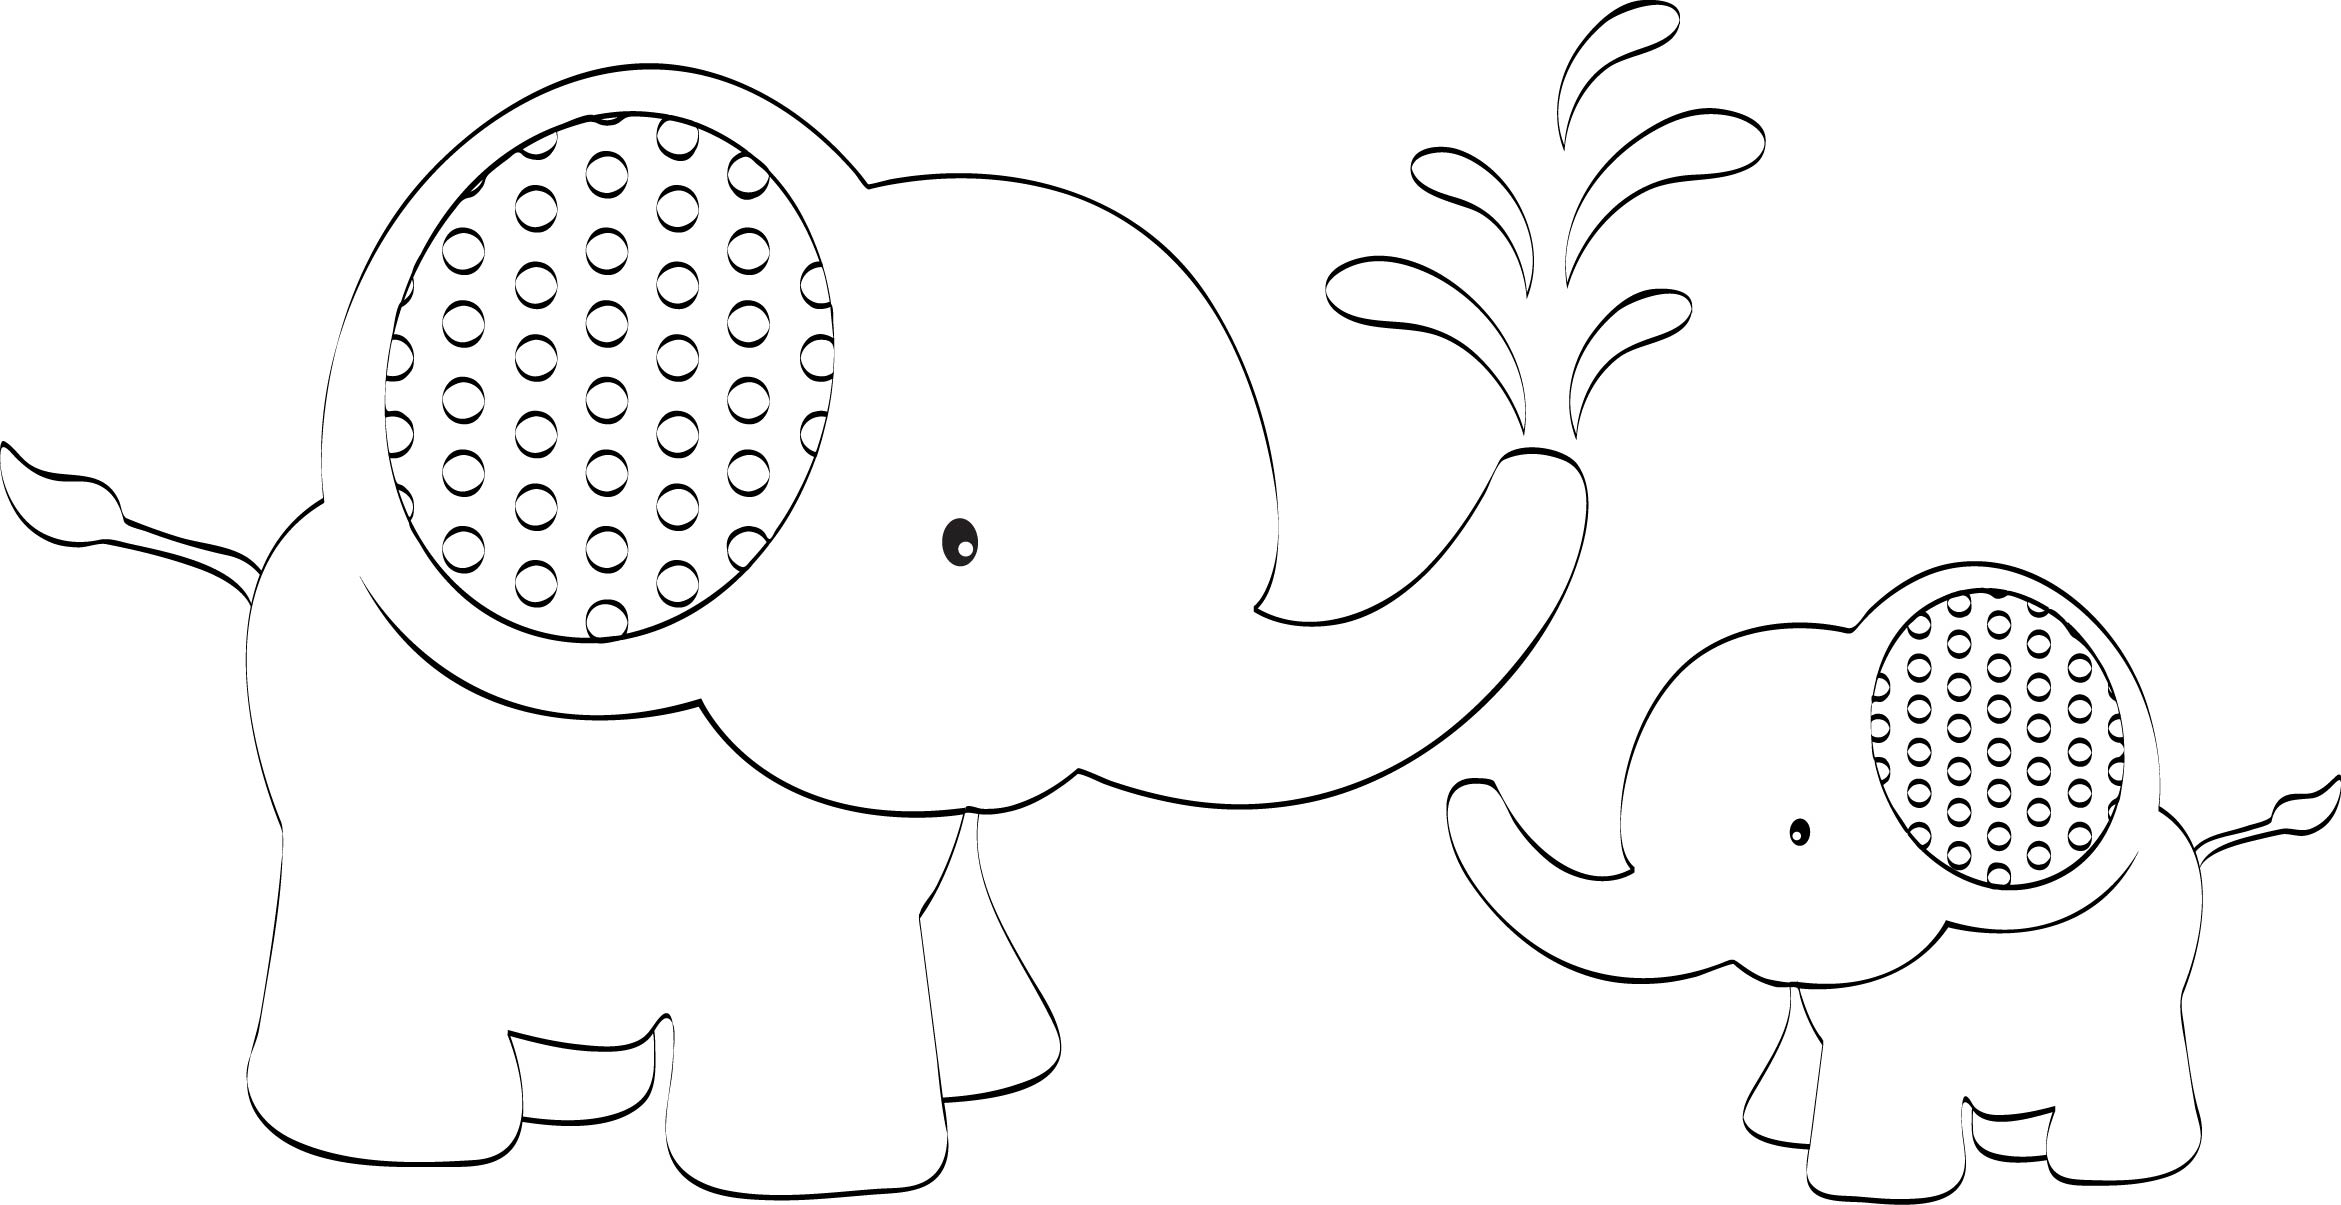 6 Best Images of Elephant Outline Printable - Elephant ...